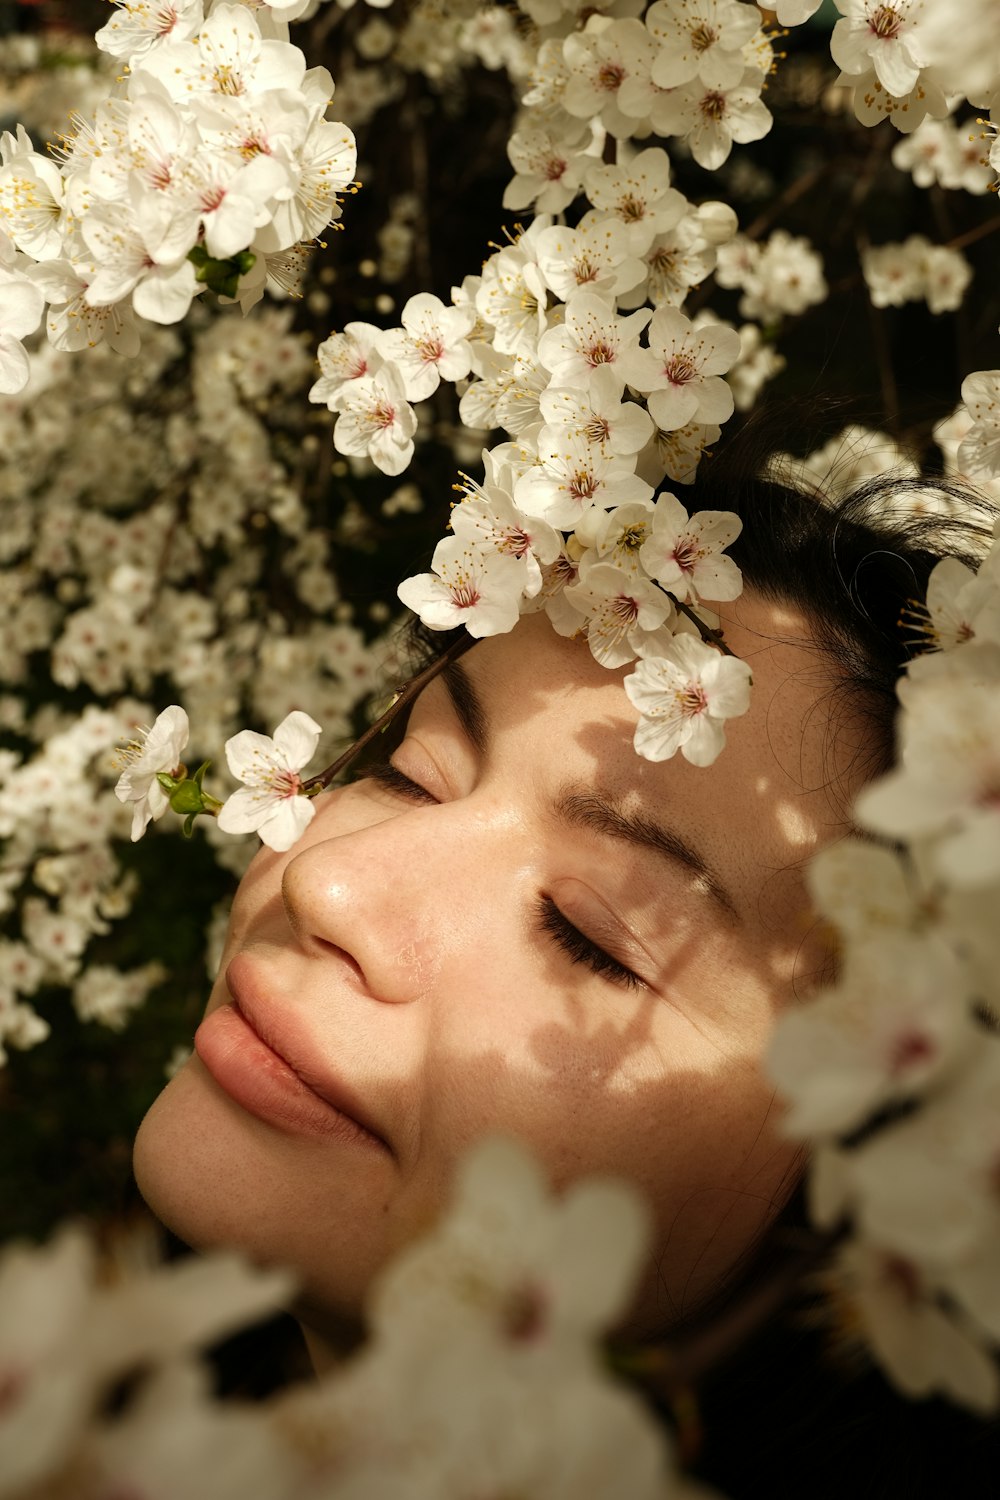 a woman with her eyes closed is surrounded by white flowers